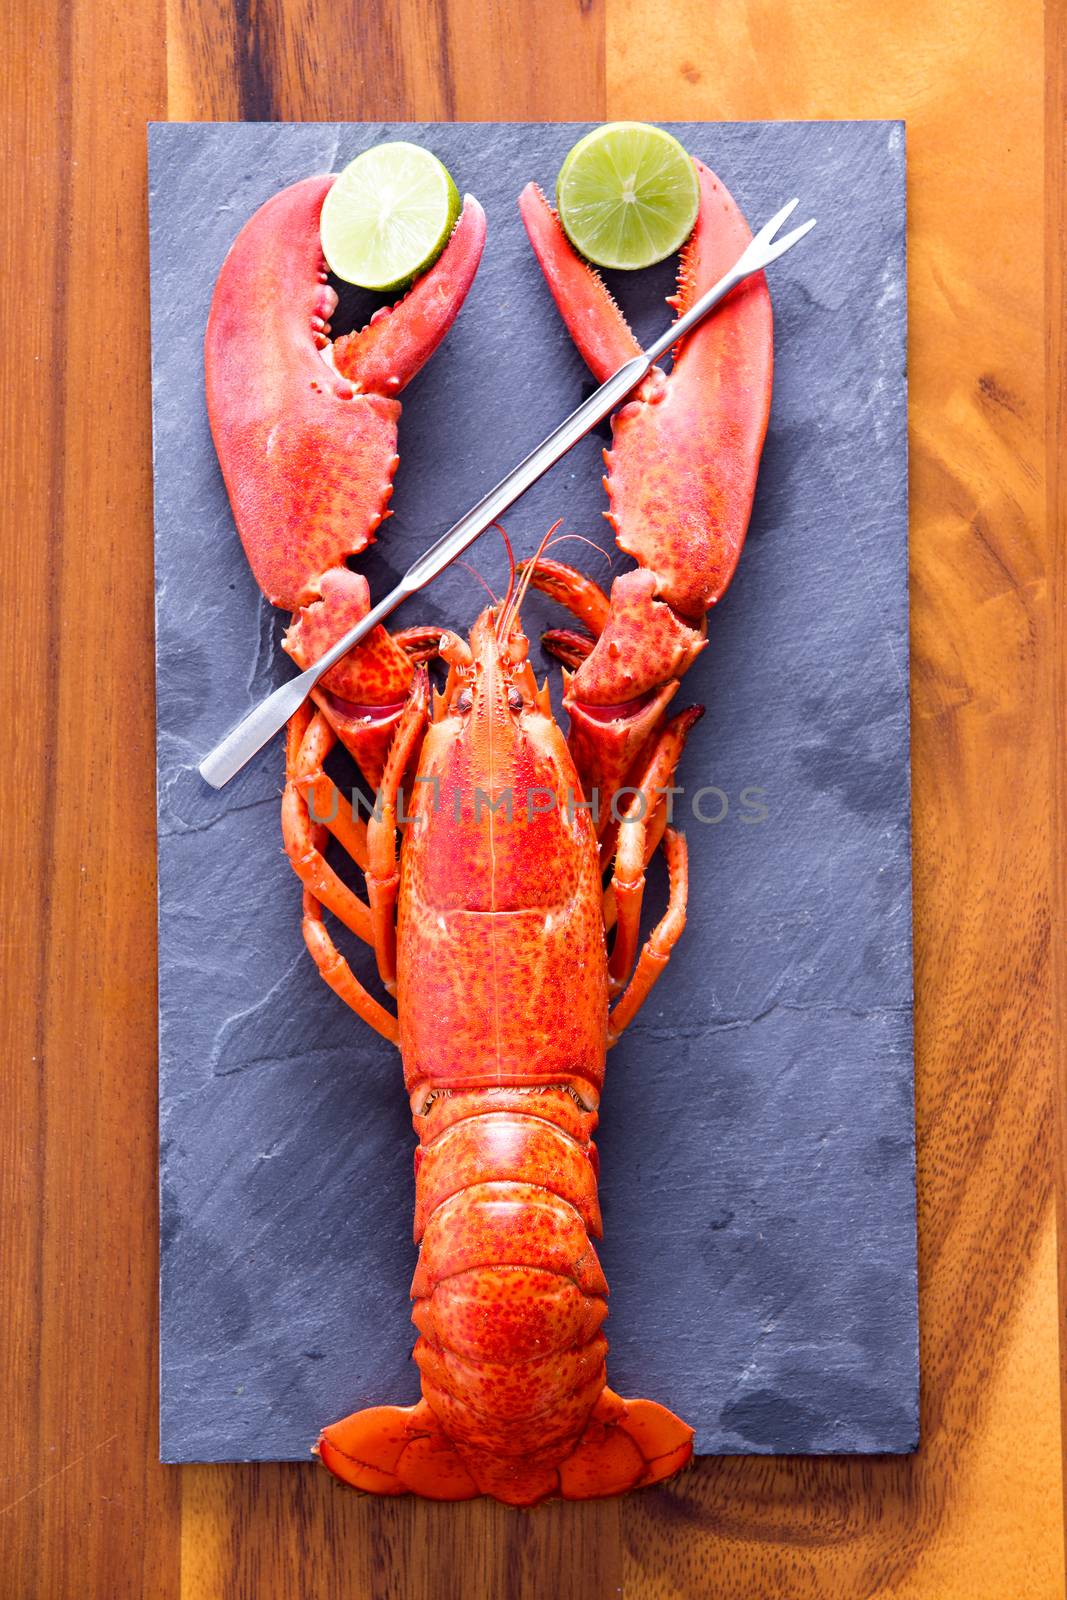 Lobster Clipping Limes on Cutting Board with Picks by coskun